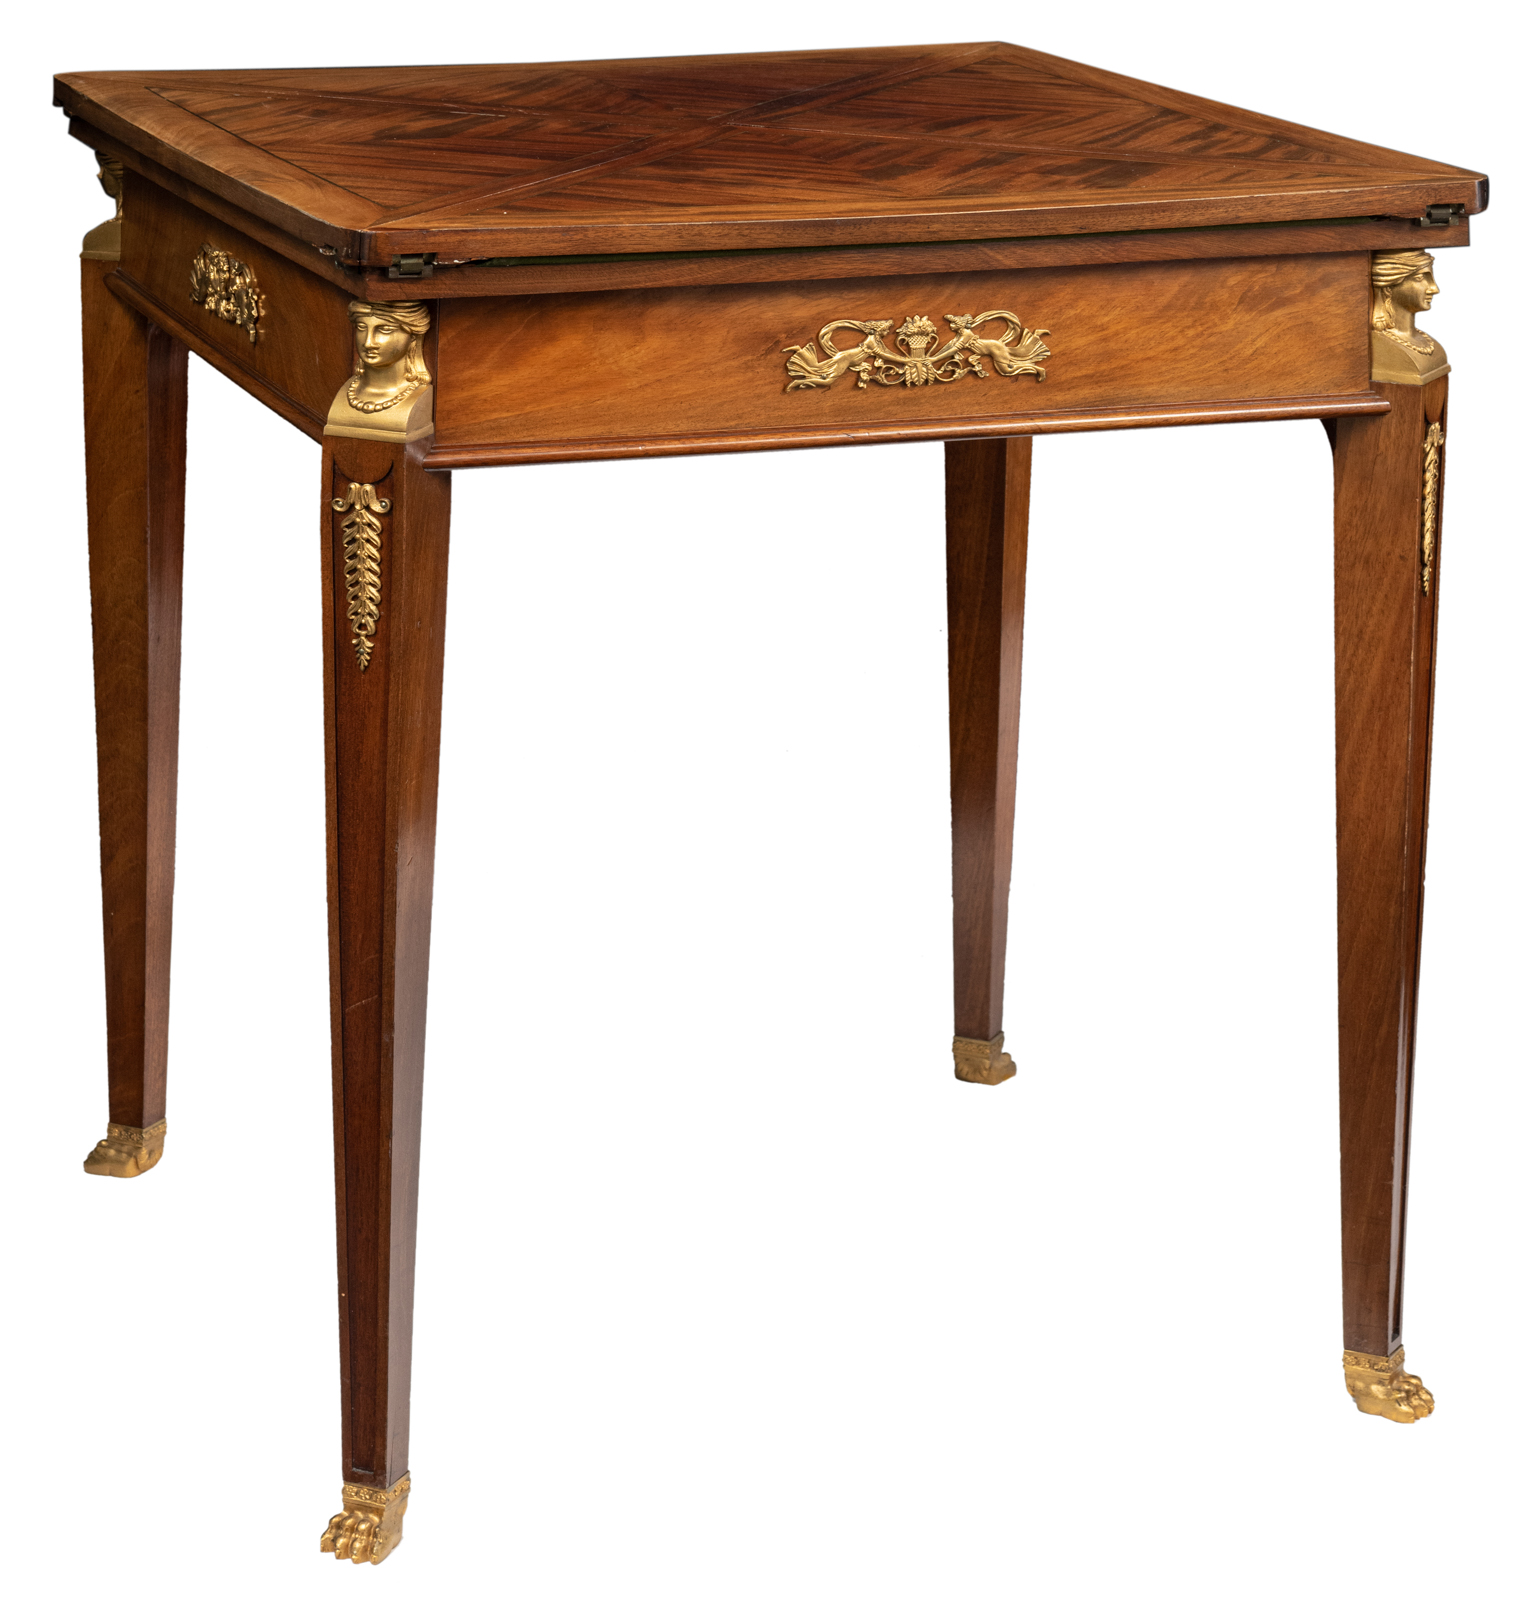 A fine French Empire style mahogany veneered folding playing table with gilt bronze mounts, brass in